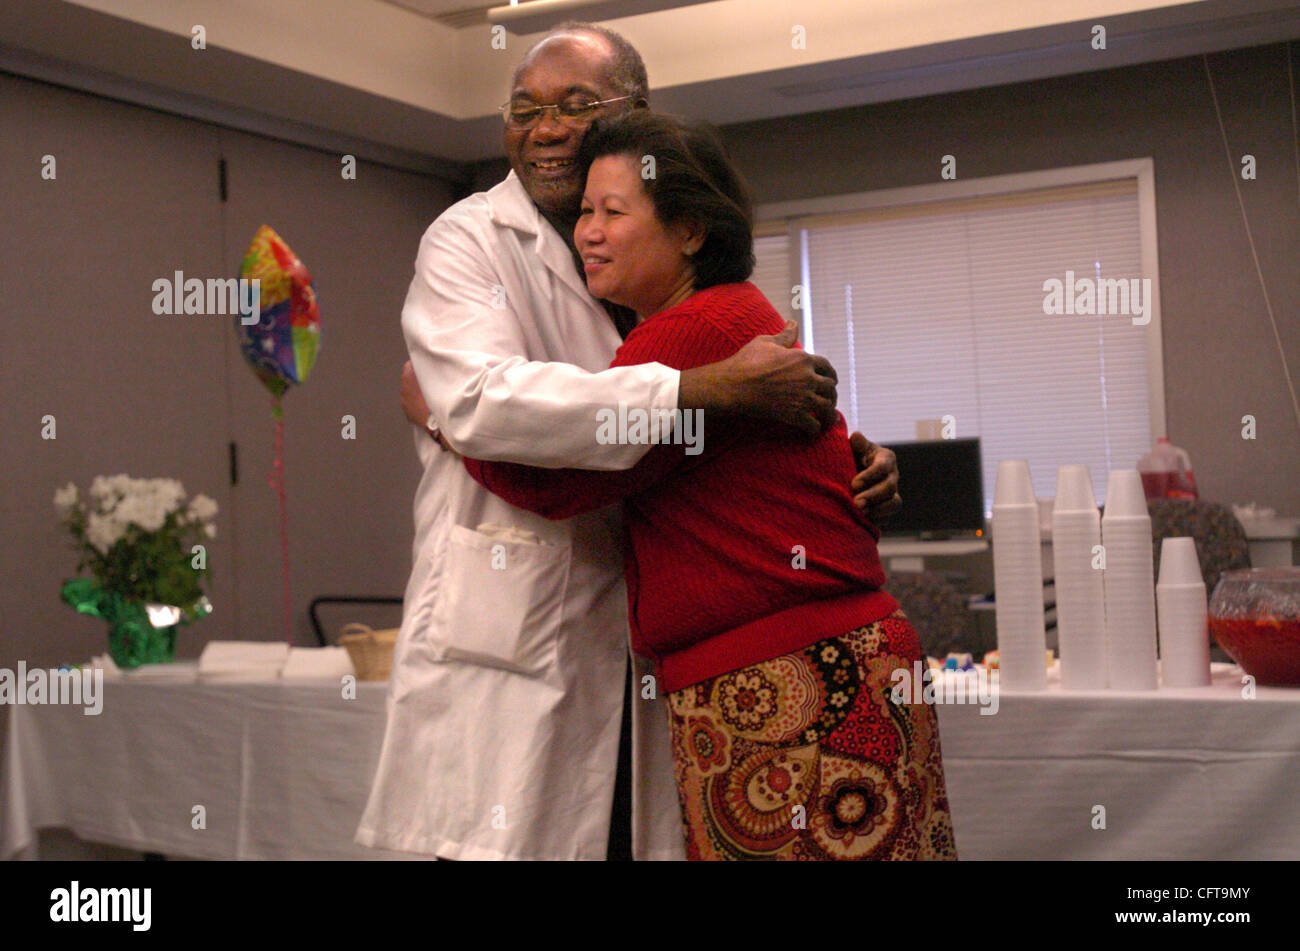 Dr. Camillus Udoffia, gets a warm embrace from Kaiser employee Betty Fong, on Tuesday, December 19, 2006 during a retirement party for his work as an OB/ GYN at Kaiser south. Dr. Udoffia is known for his sleight of hand in the delivery room and operating table. Dr. Udoffia, a Nigerian immigrant is b Stock Photo